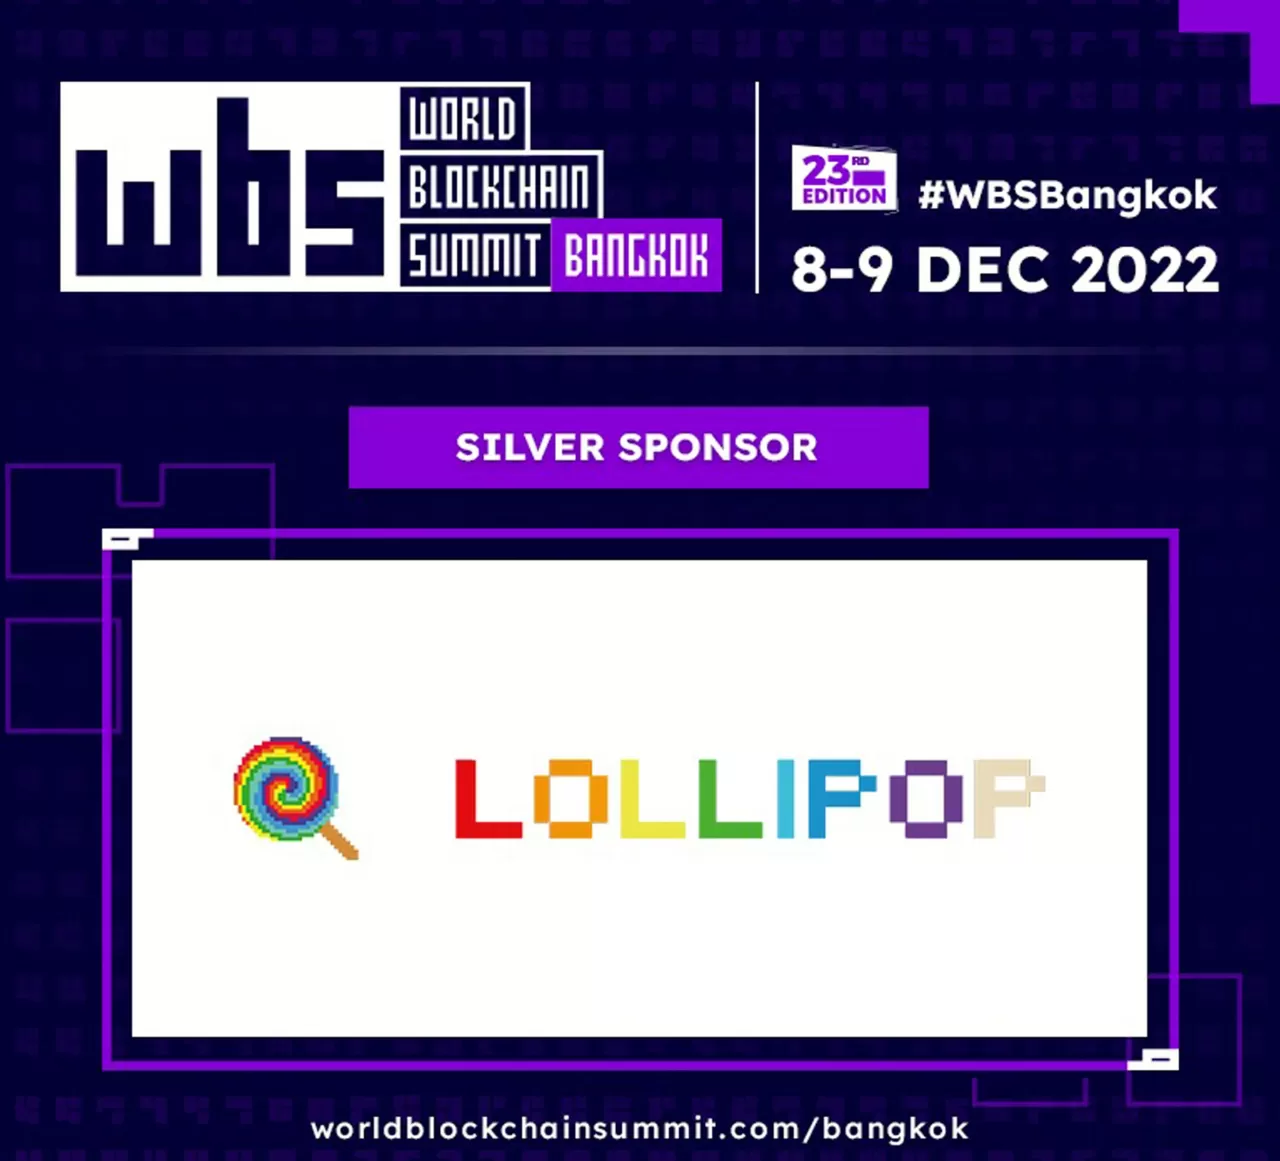 Lollipop as a Silver Sponsor was able to give 15% discount to its attendees img#3